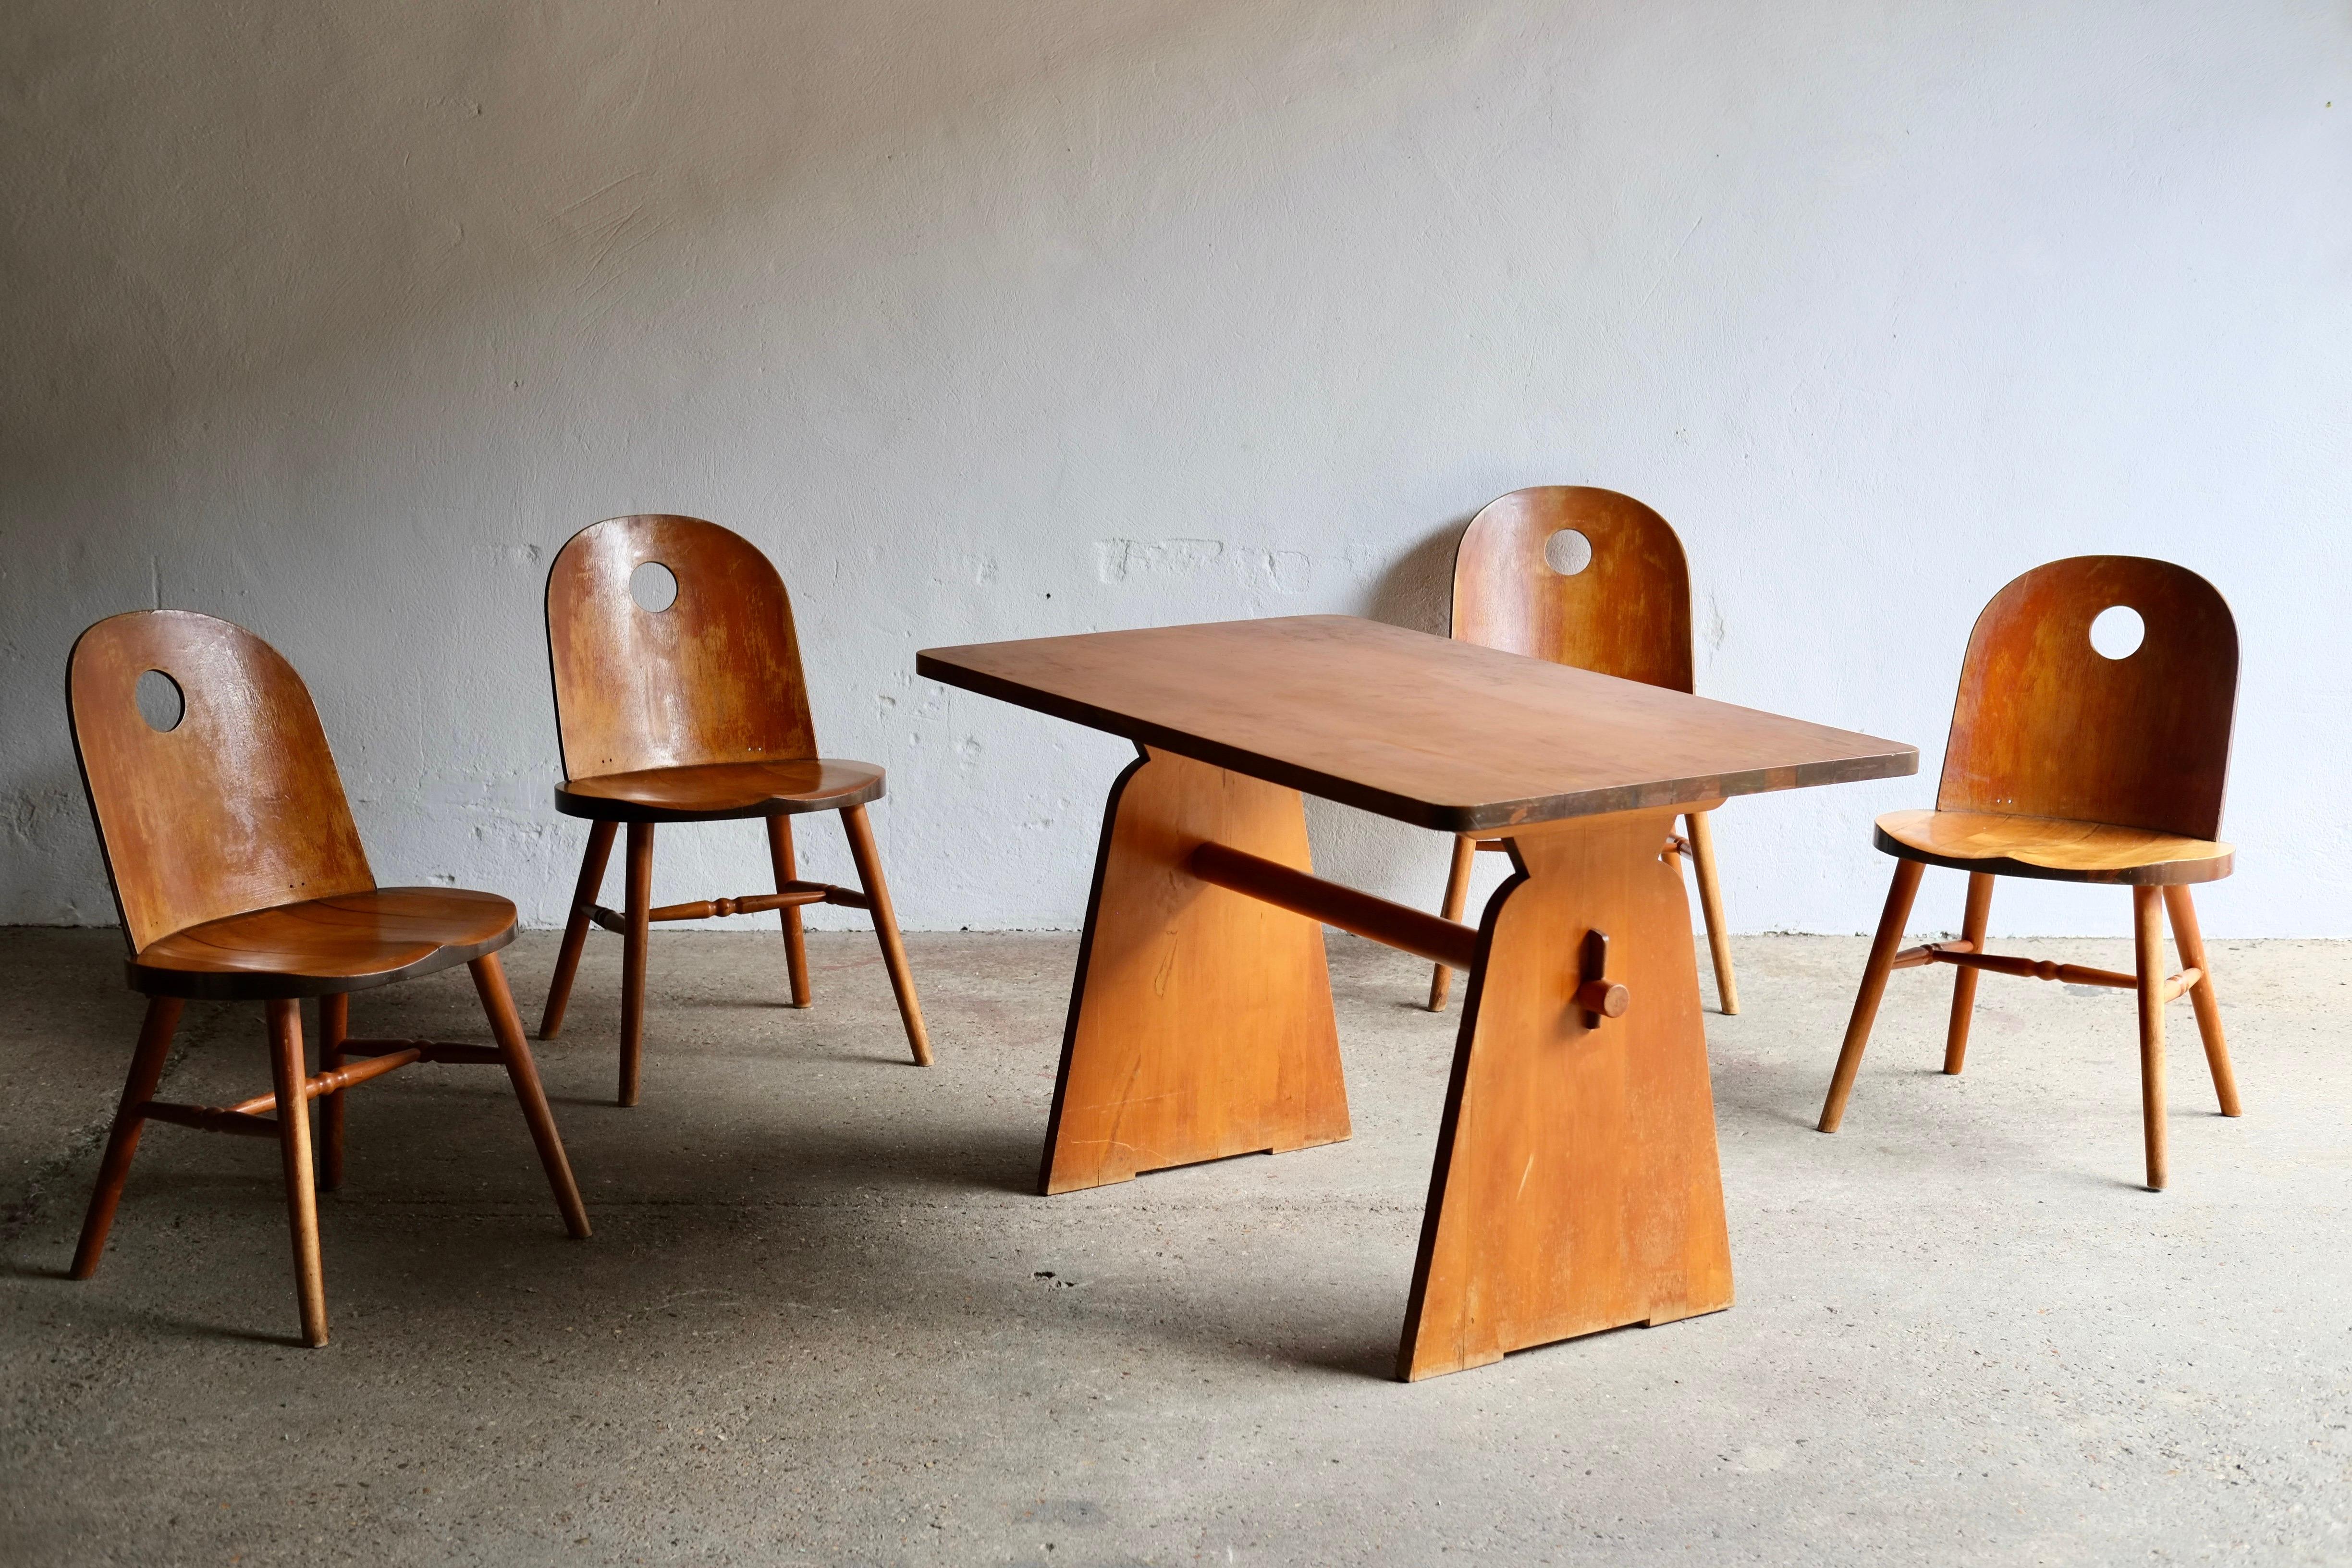 A birch dining table and chairs by Swedish architect and city planner Uno Åhren (1897-1977) for Gemla. 

Masterly crafted in birch wood with birch ply seat backs and pegged joints. 

Featuring a warm golden patina that only nearly 100 years of age